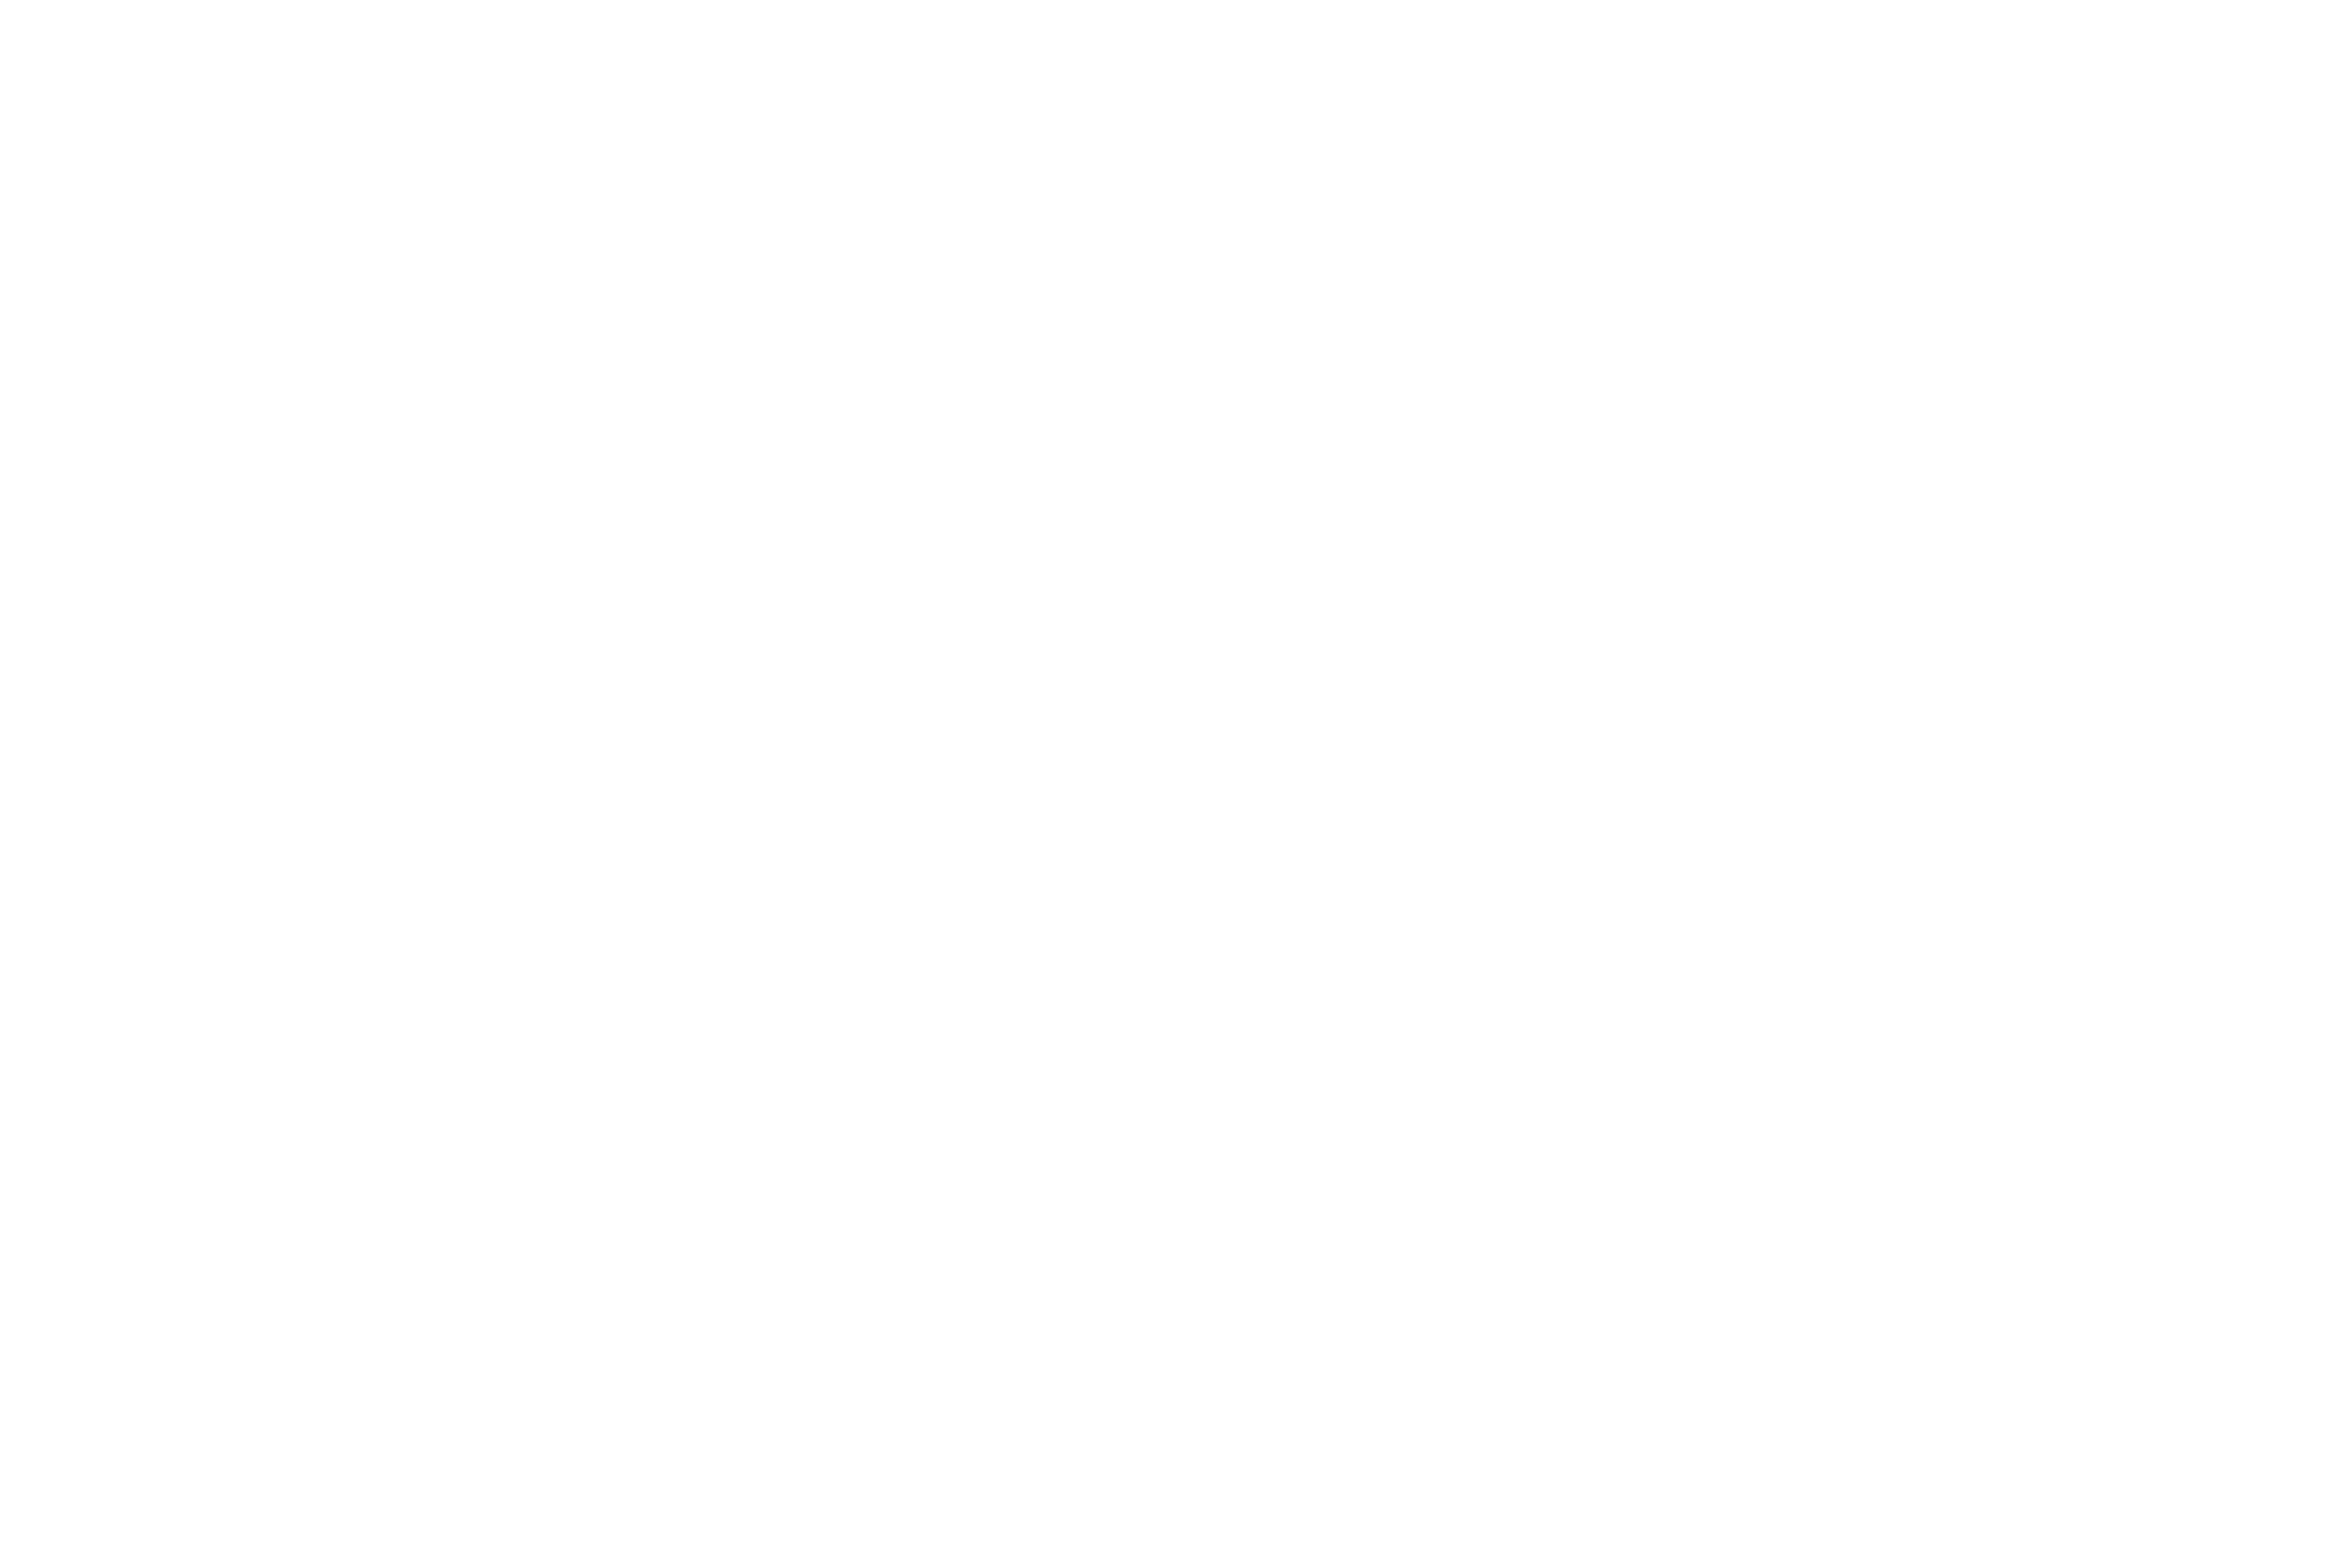 Sensor detection of the intersection point, precisely maintained pressure 